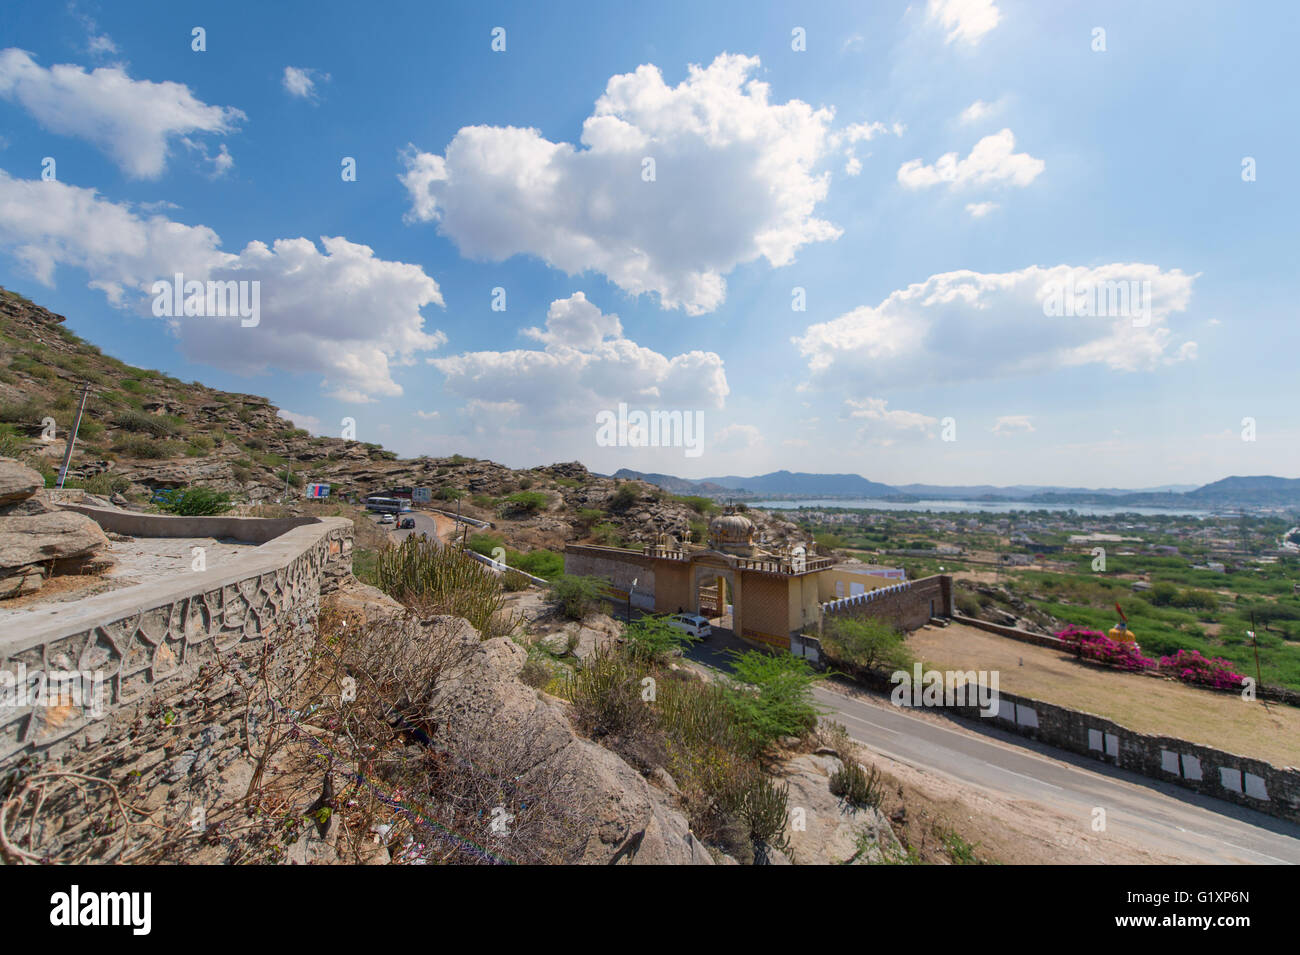 View of the Ajmer town in India with blue sky and clouds formation. Stock Photo